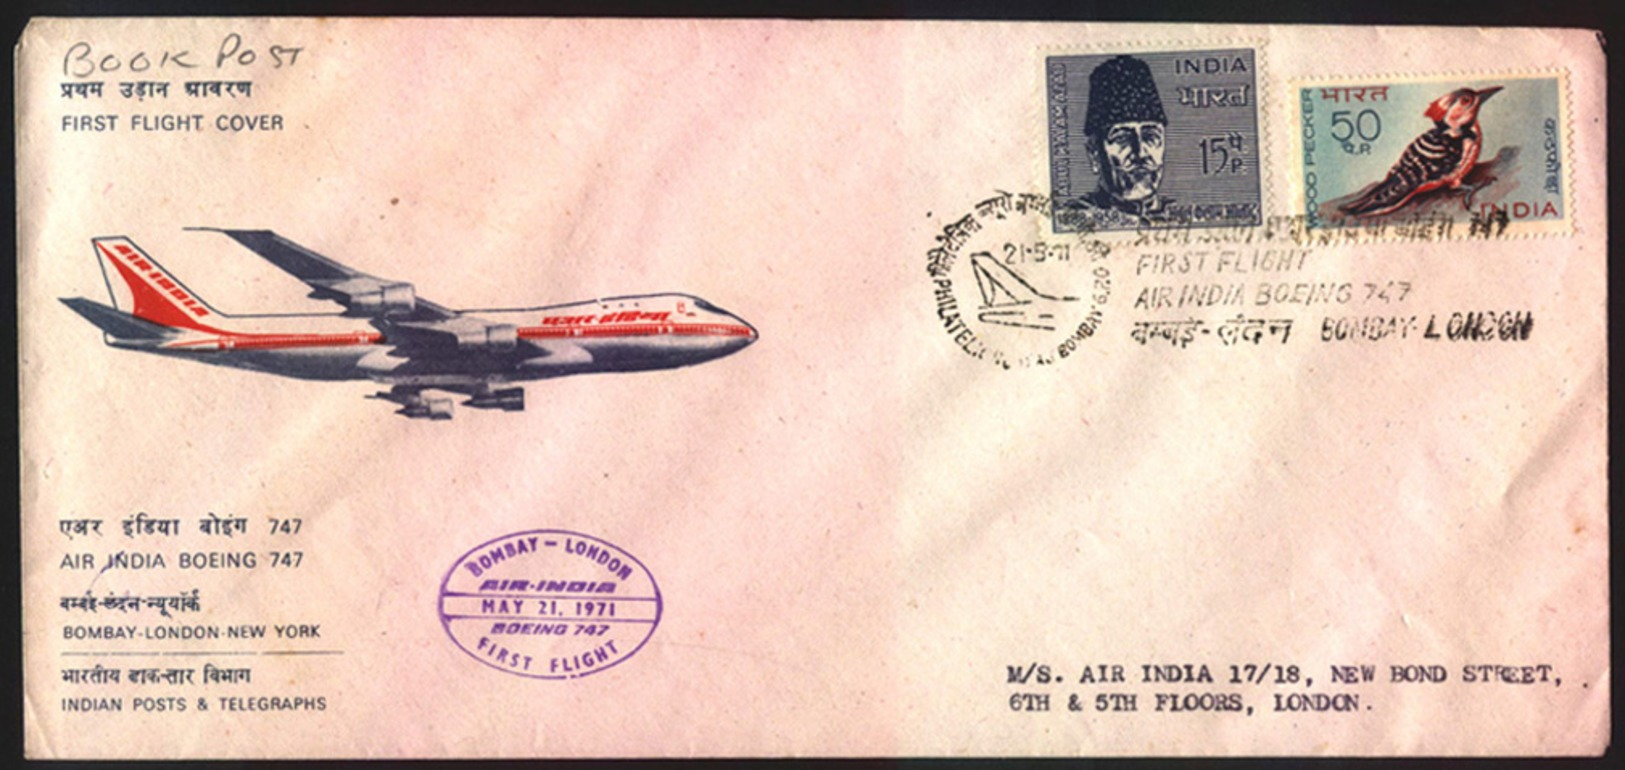 INDIA STAMPS, FIRST FLIGHT COVER, 21 MAY 1971 - Airmail